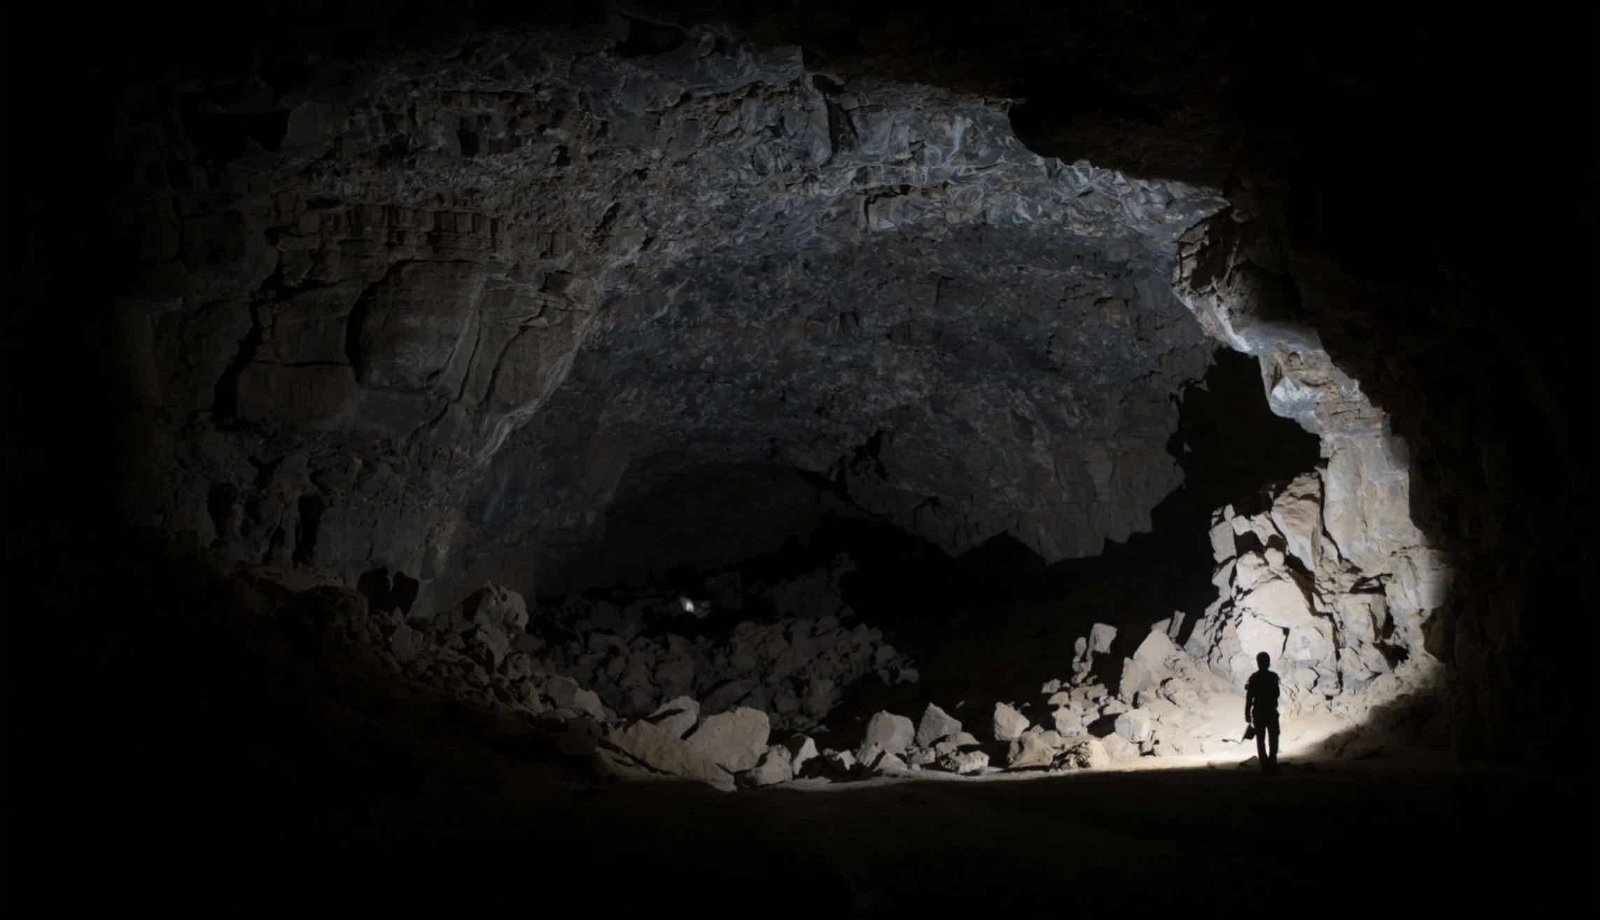 Deep Within These Ancient Lava Tube Caves, Archaeologists Have Made an Unprecedented Discovery